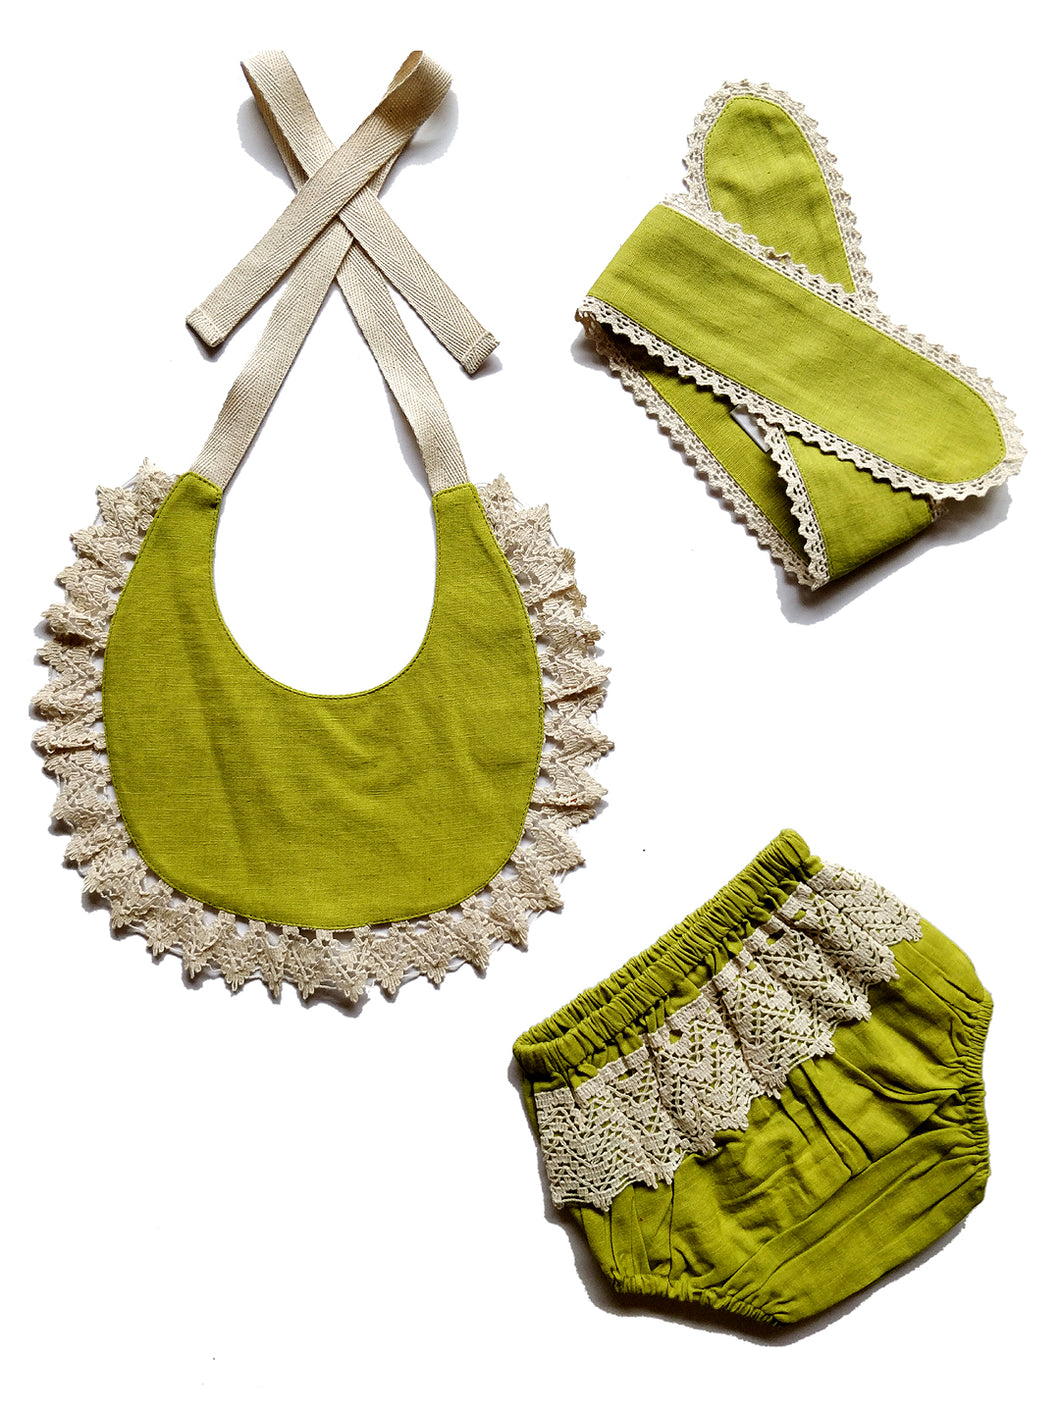 Set of 3 - Crochet Diaper Cover with Matching Bib & Headband in Lime